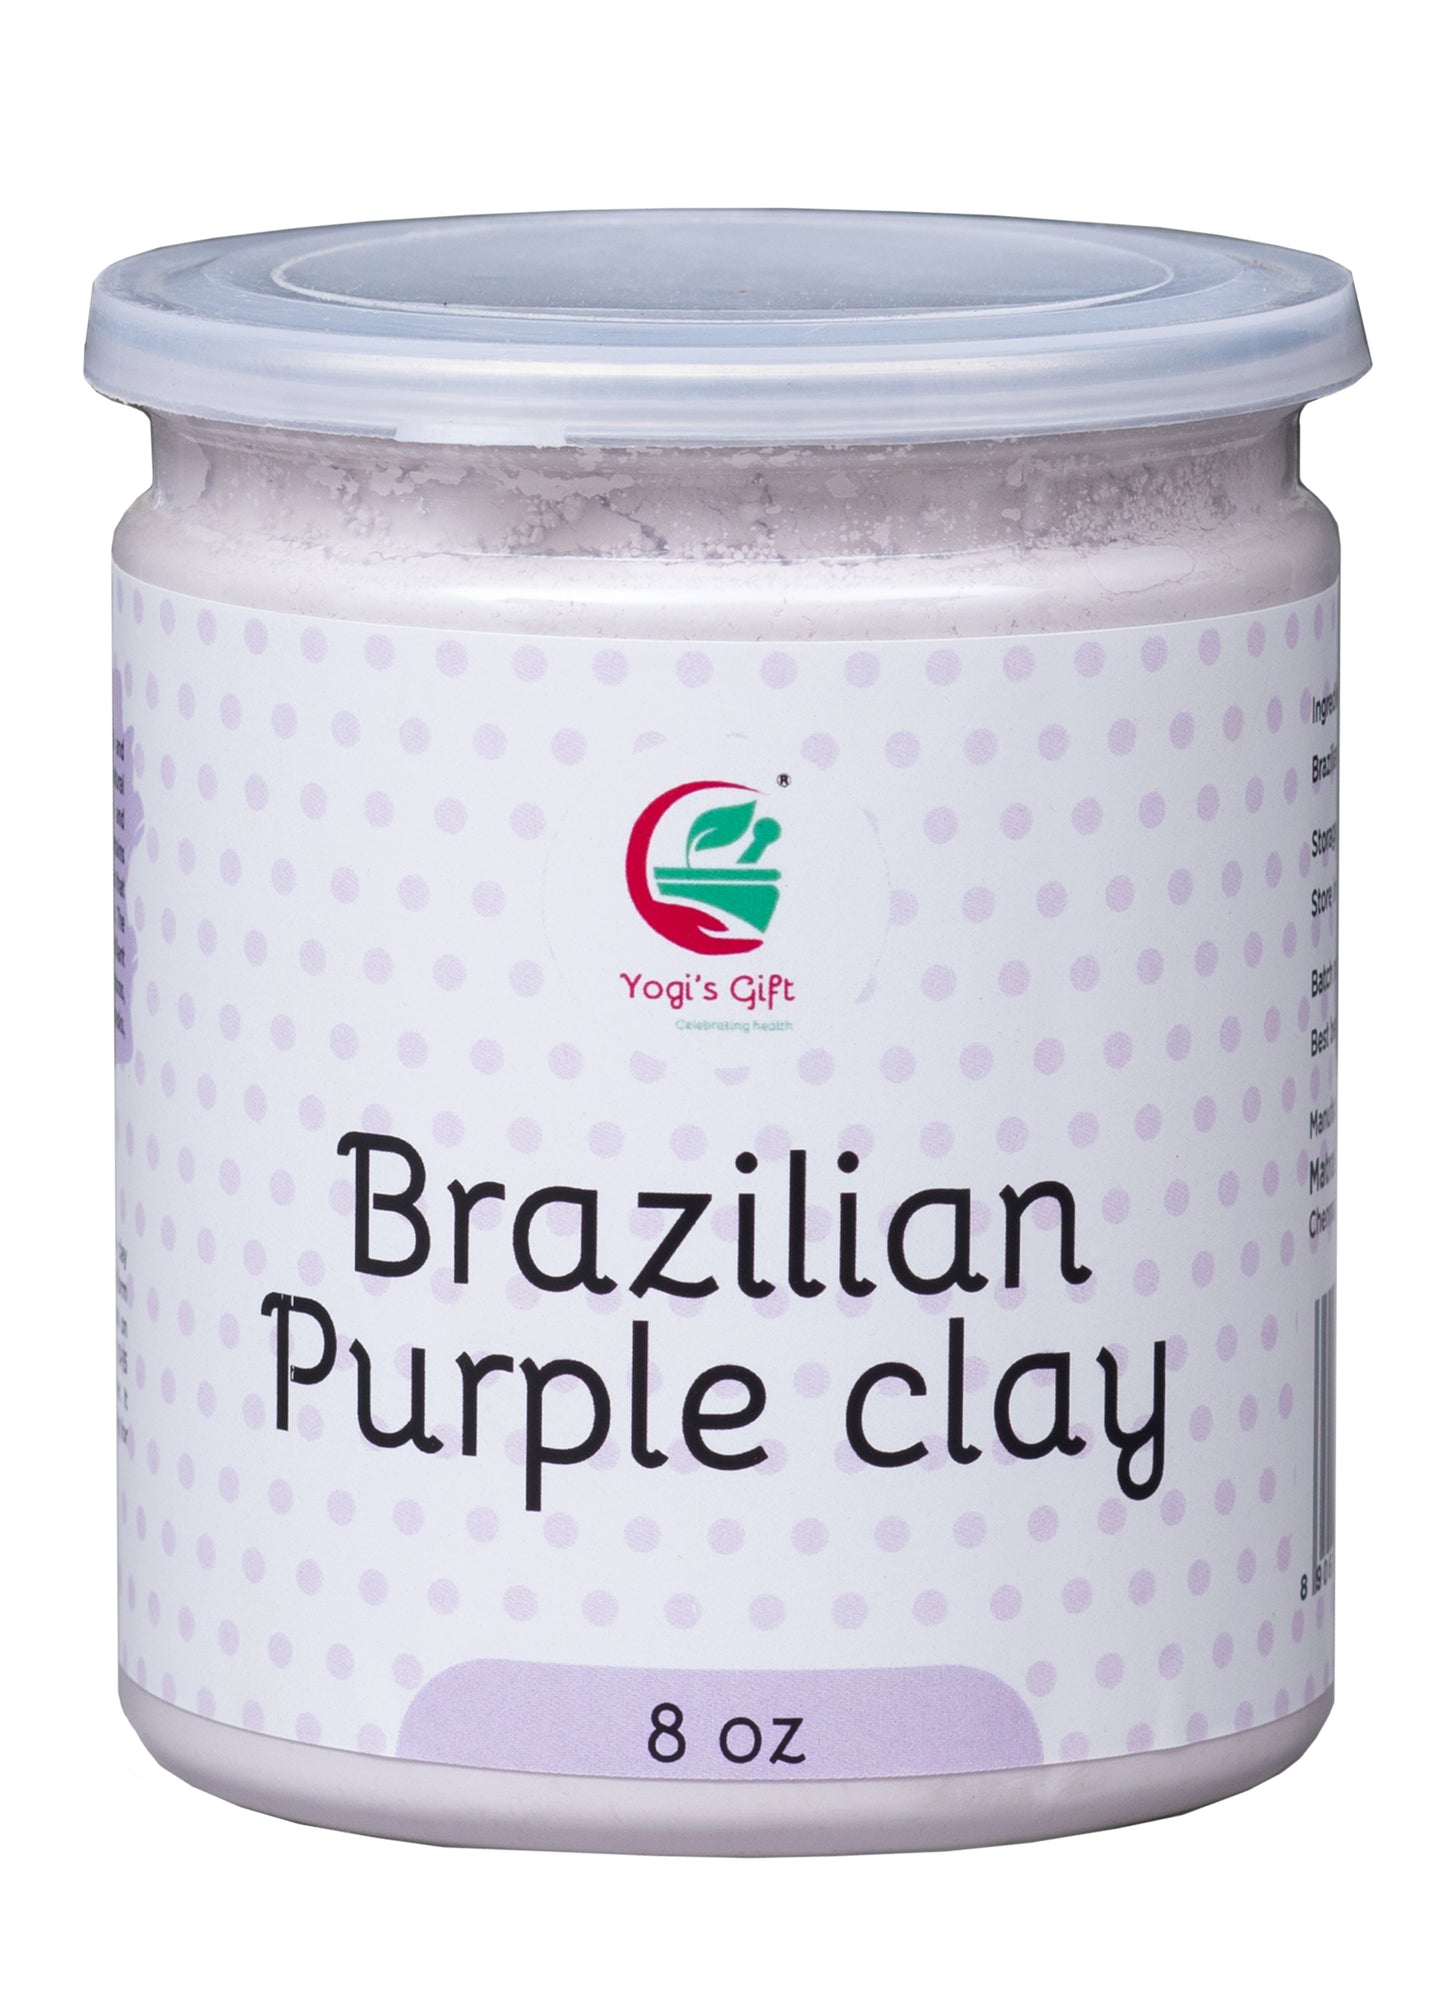 Brazilian Purple clay 8oz | Soap Making Clay, Clay Face Pack  for Sensitive Skin | Natural Purple Clay Powder for Soap Making | Yogi's Gift®